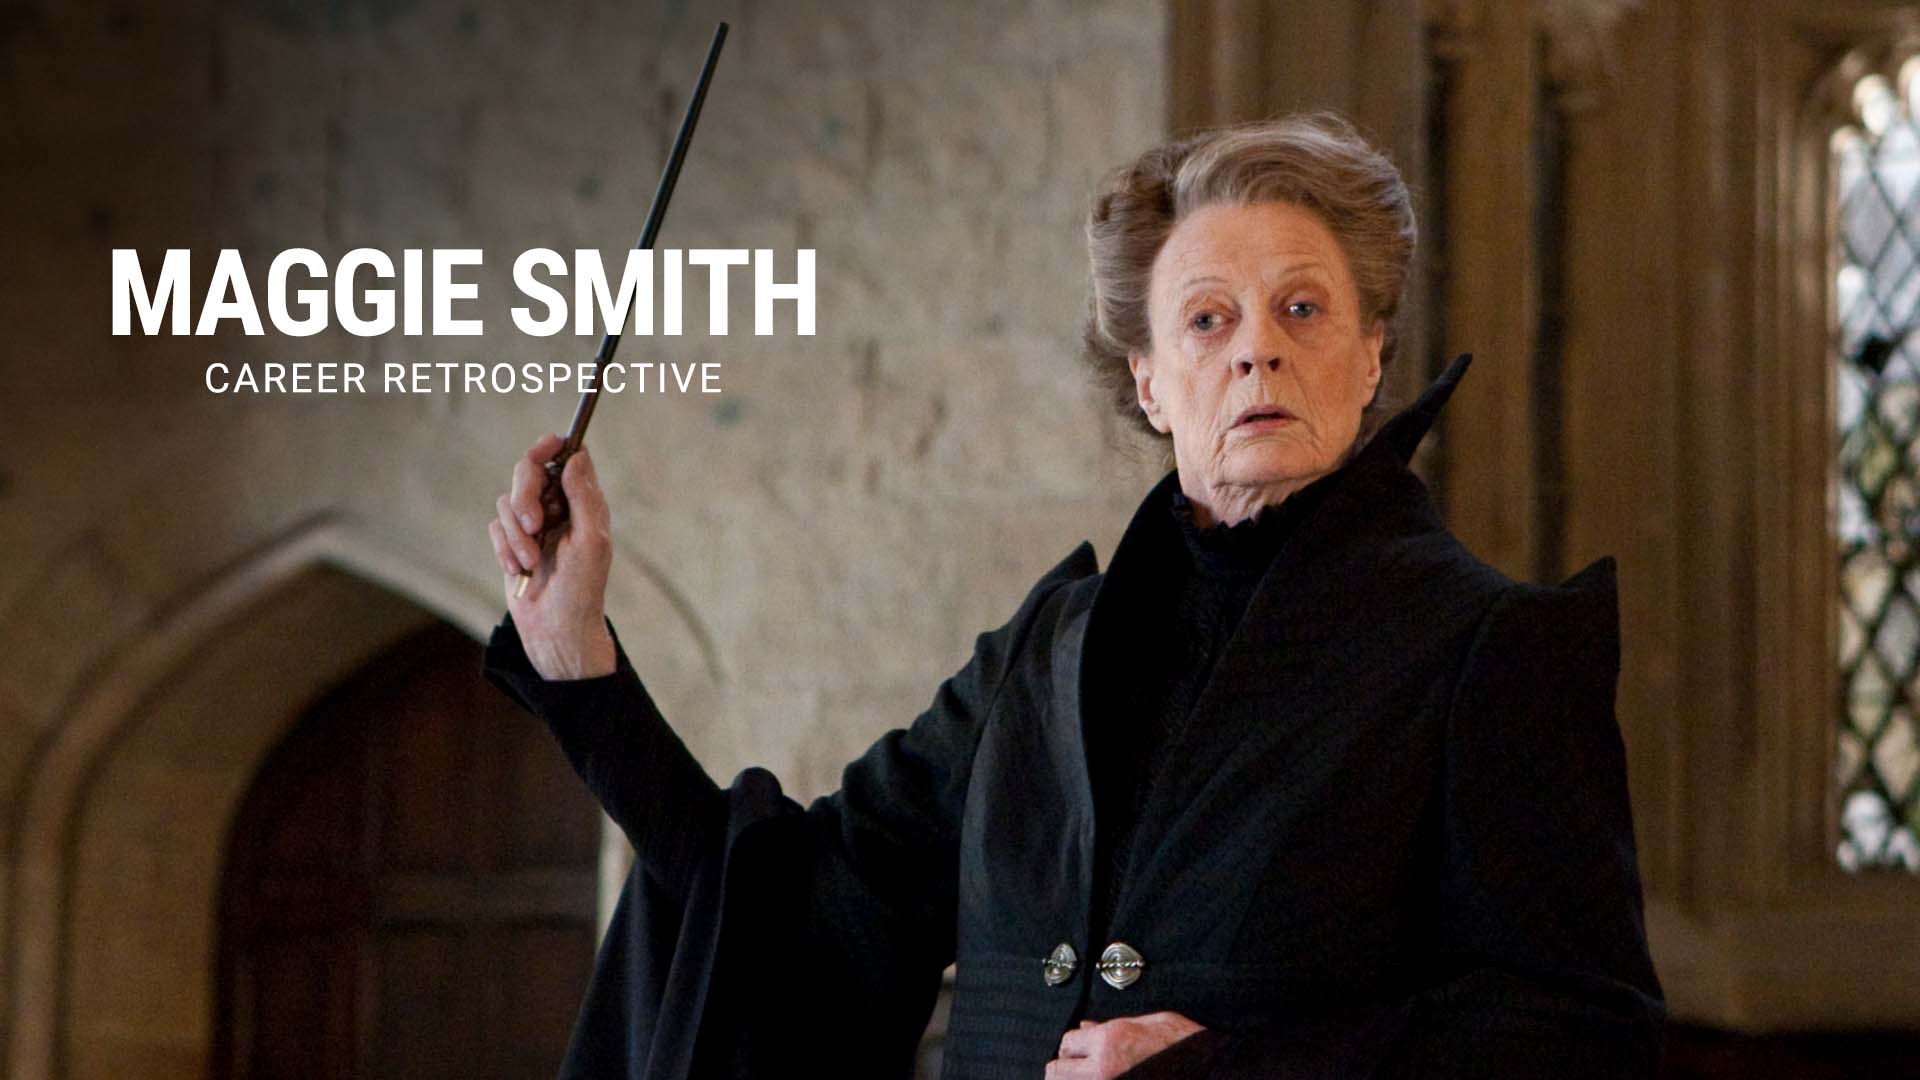 Professor Minerva McGonagall is the stern but fair Transfiguration professor at Hogwarts School of Witchcraft and Wizardry. She also serves as Deputy Headmistress and a member of the Order of the Phoenix.